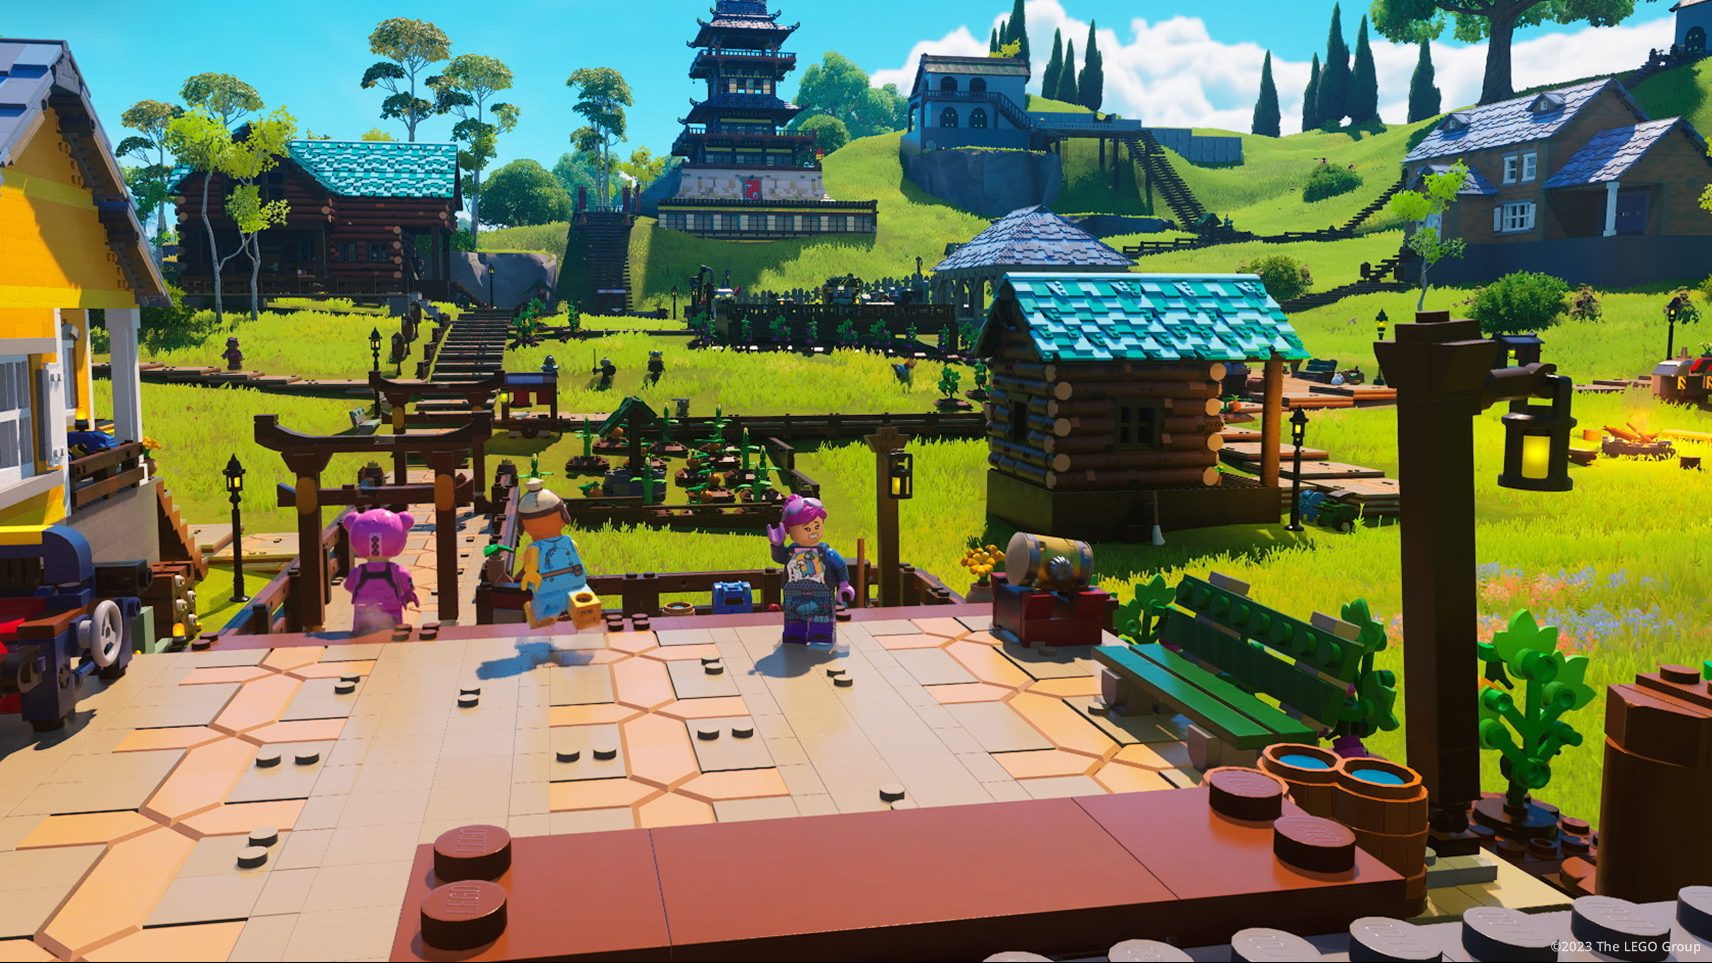 Lego Fortnite is about to be your kid's favorite video game